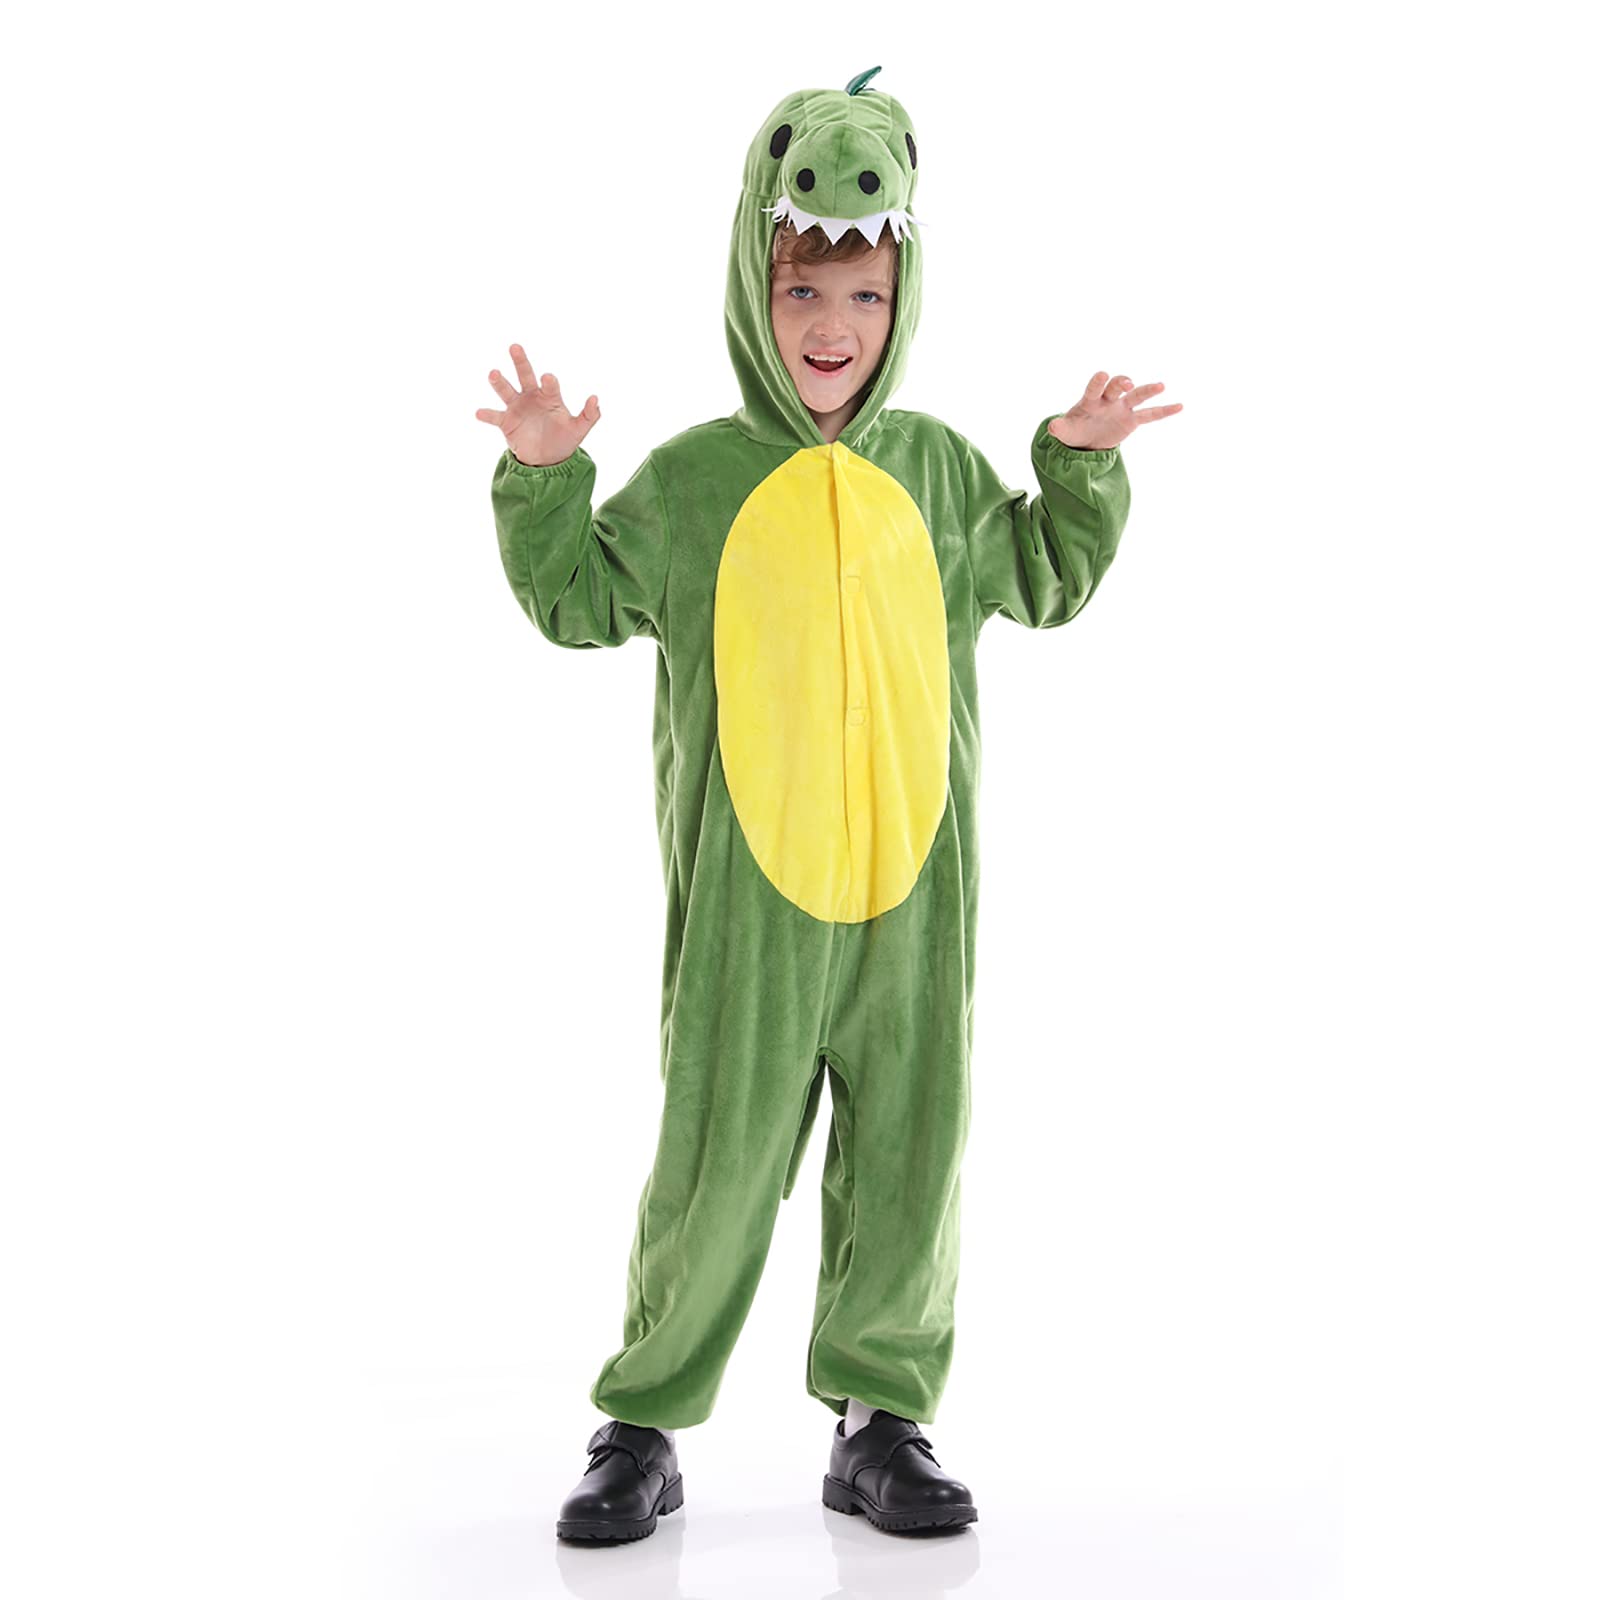 Funivals Plush Dinosaur Costume For Unisex Kids, Animals Soft Jumpsuit Pajamas Boys, T-Rex Cosplay Outfit For Halloween Christmas (L(For 